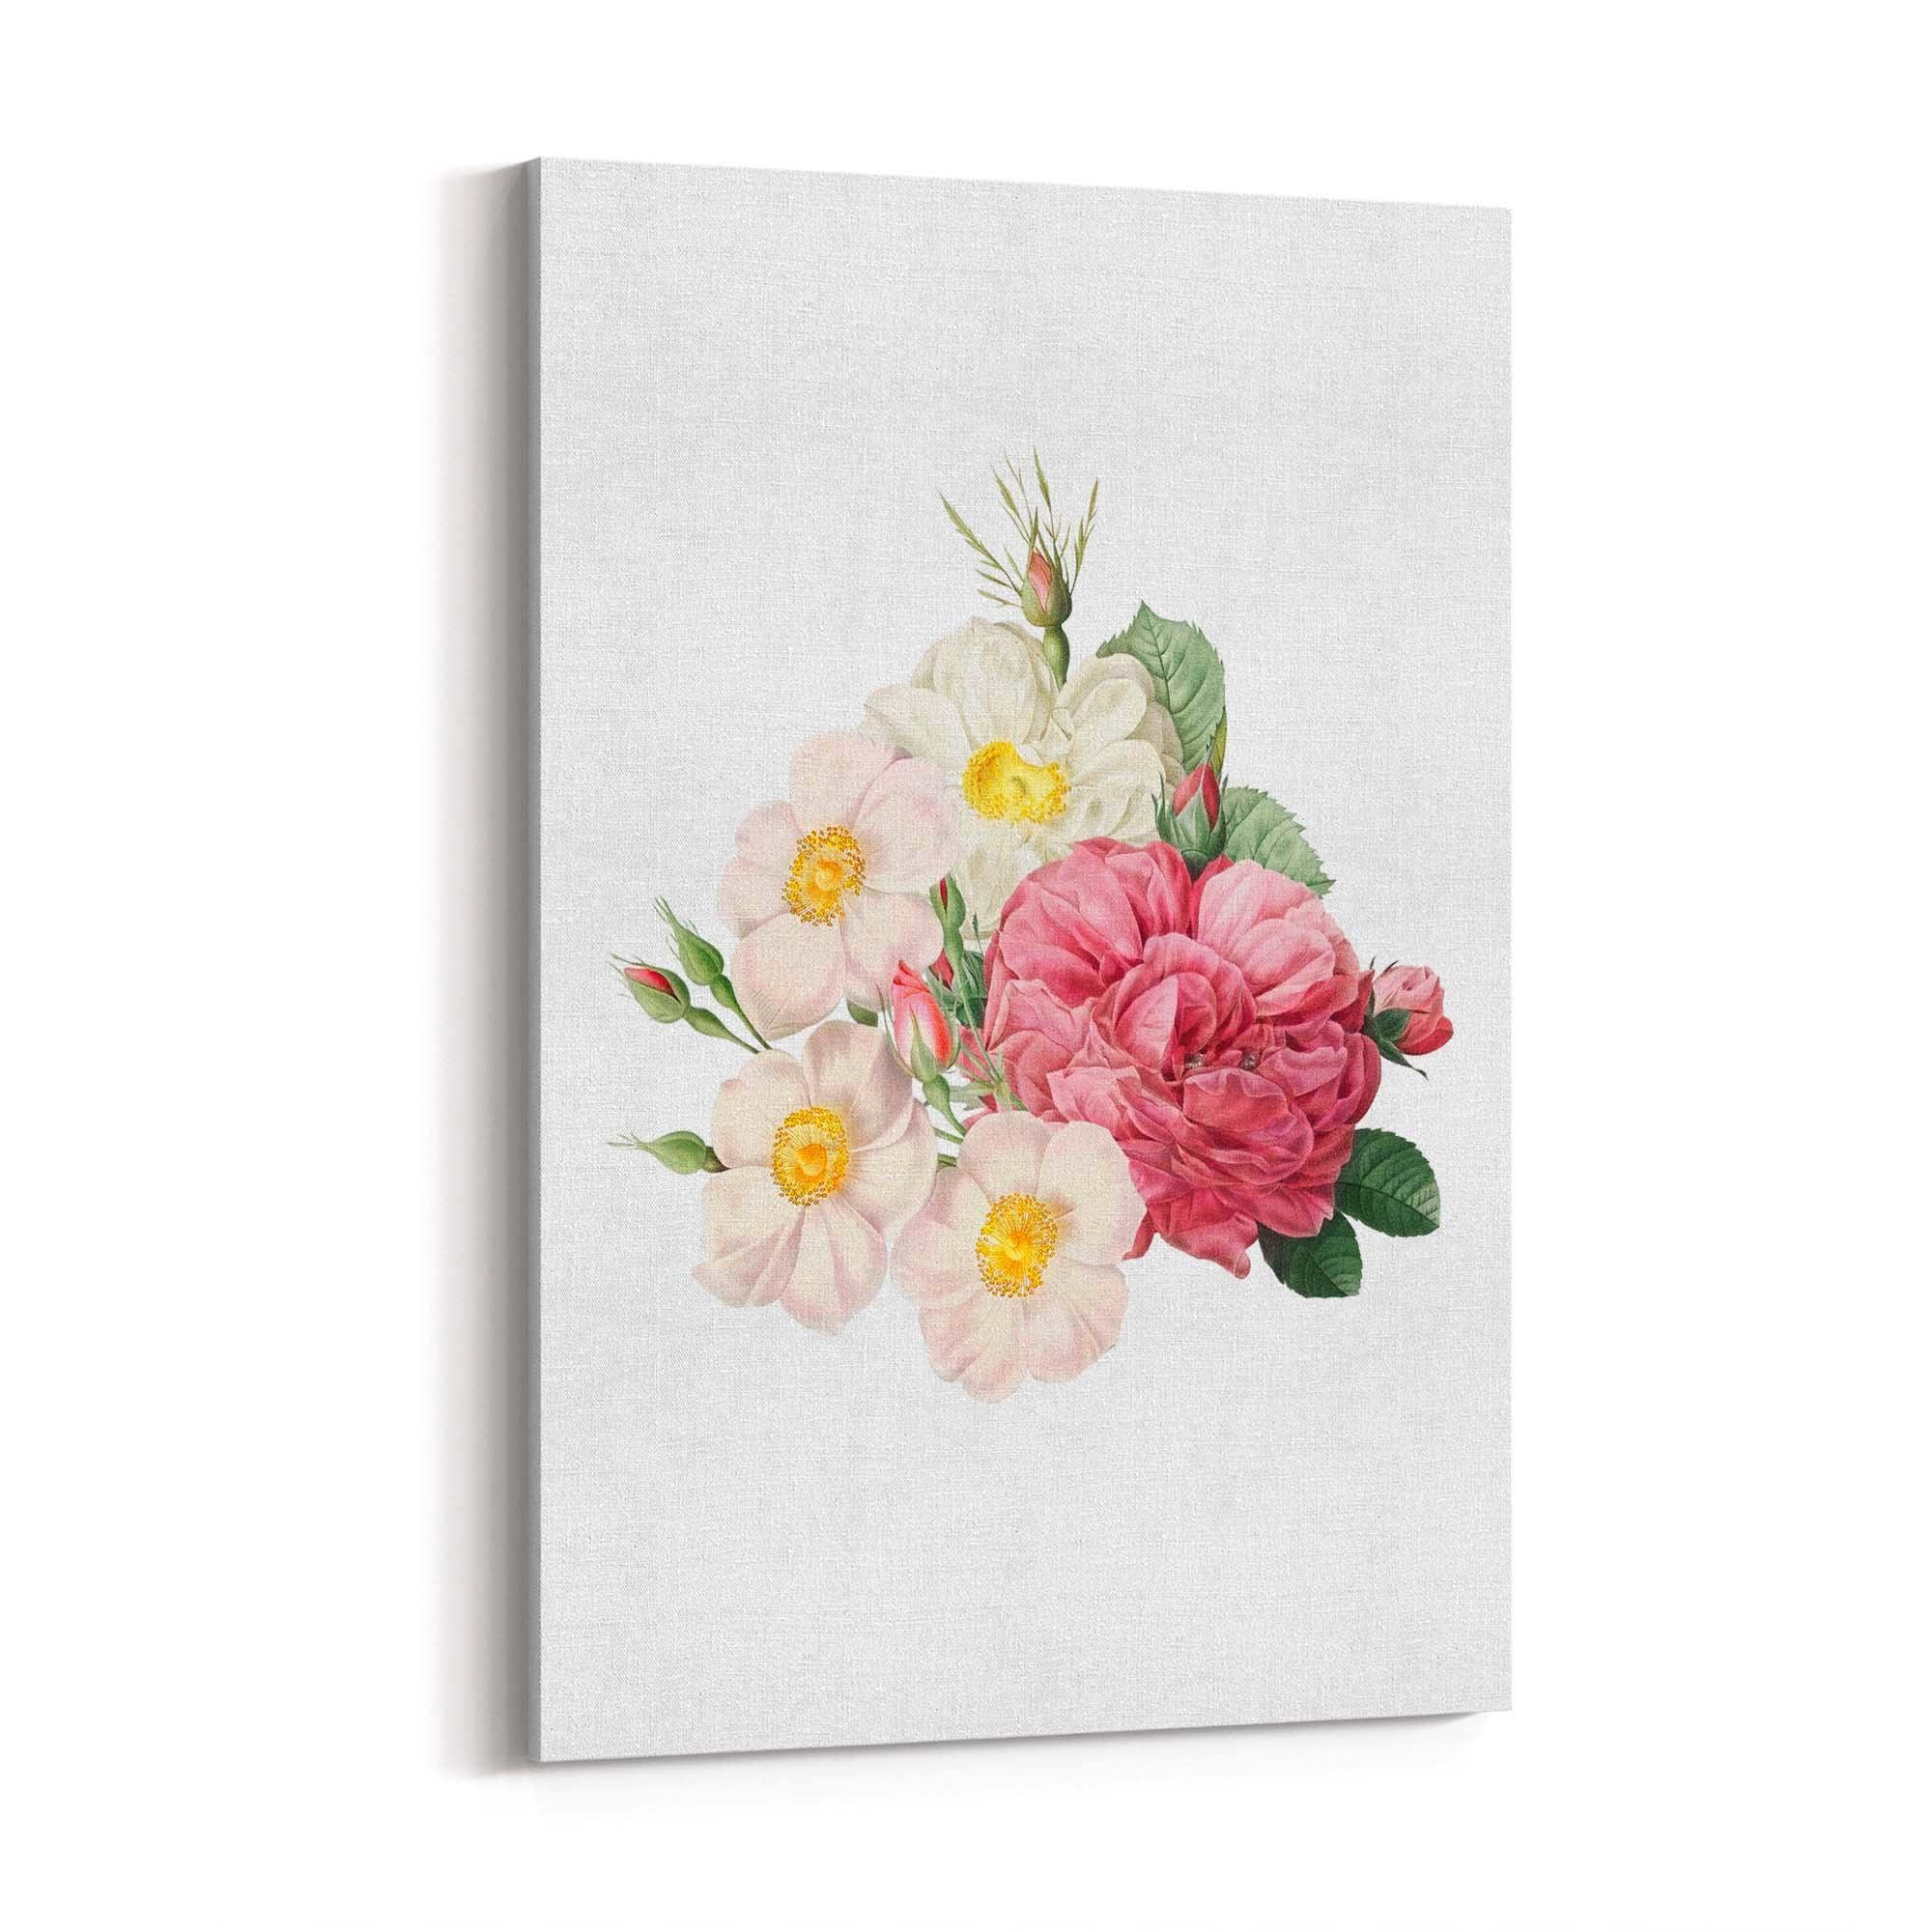 Botanical Flower Painting Floral Kitchen Wall Art #5: Poster Print, Canvas or Framed